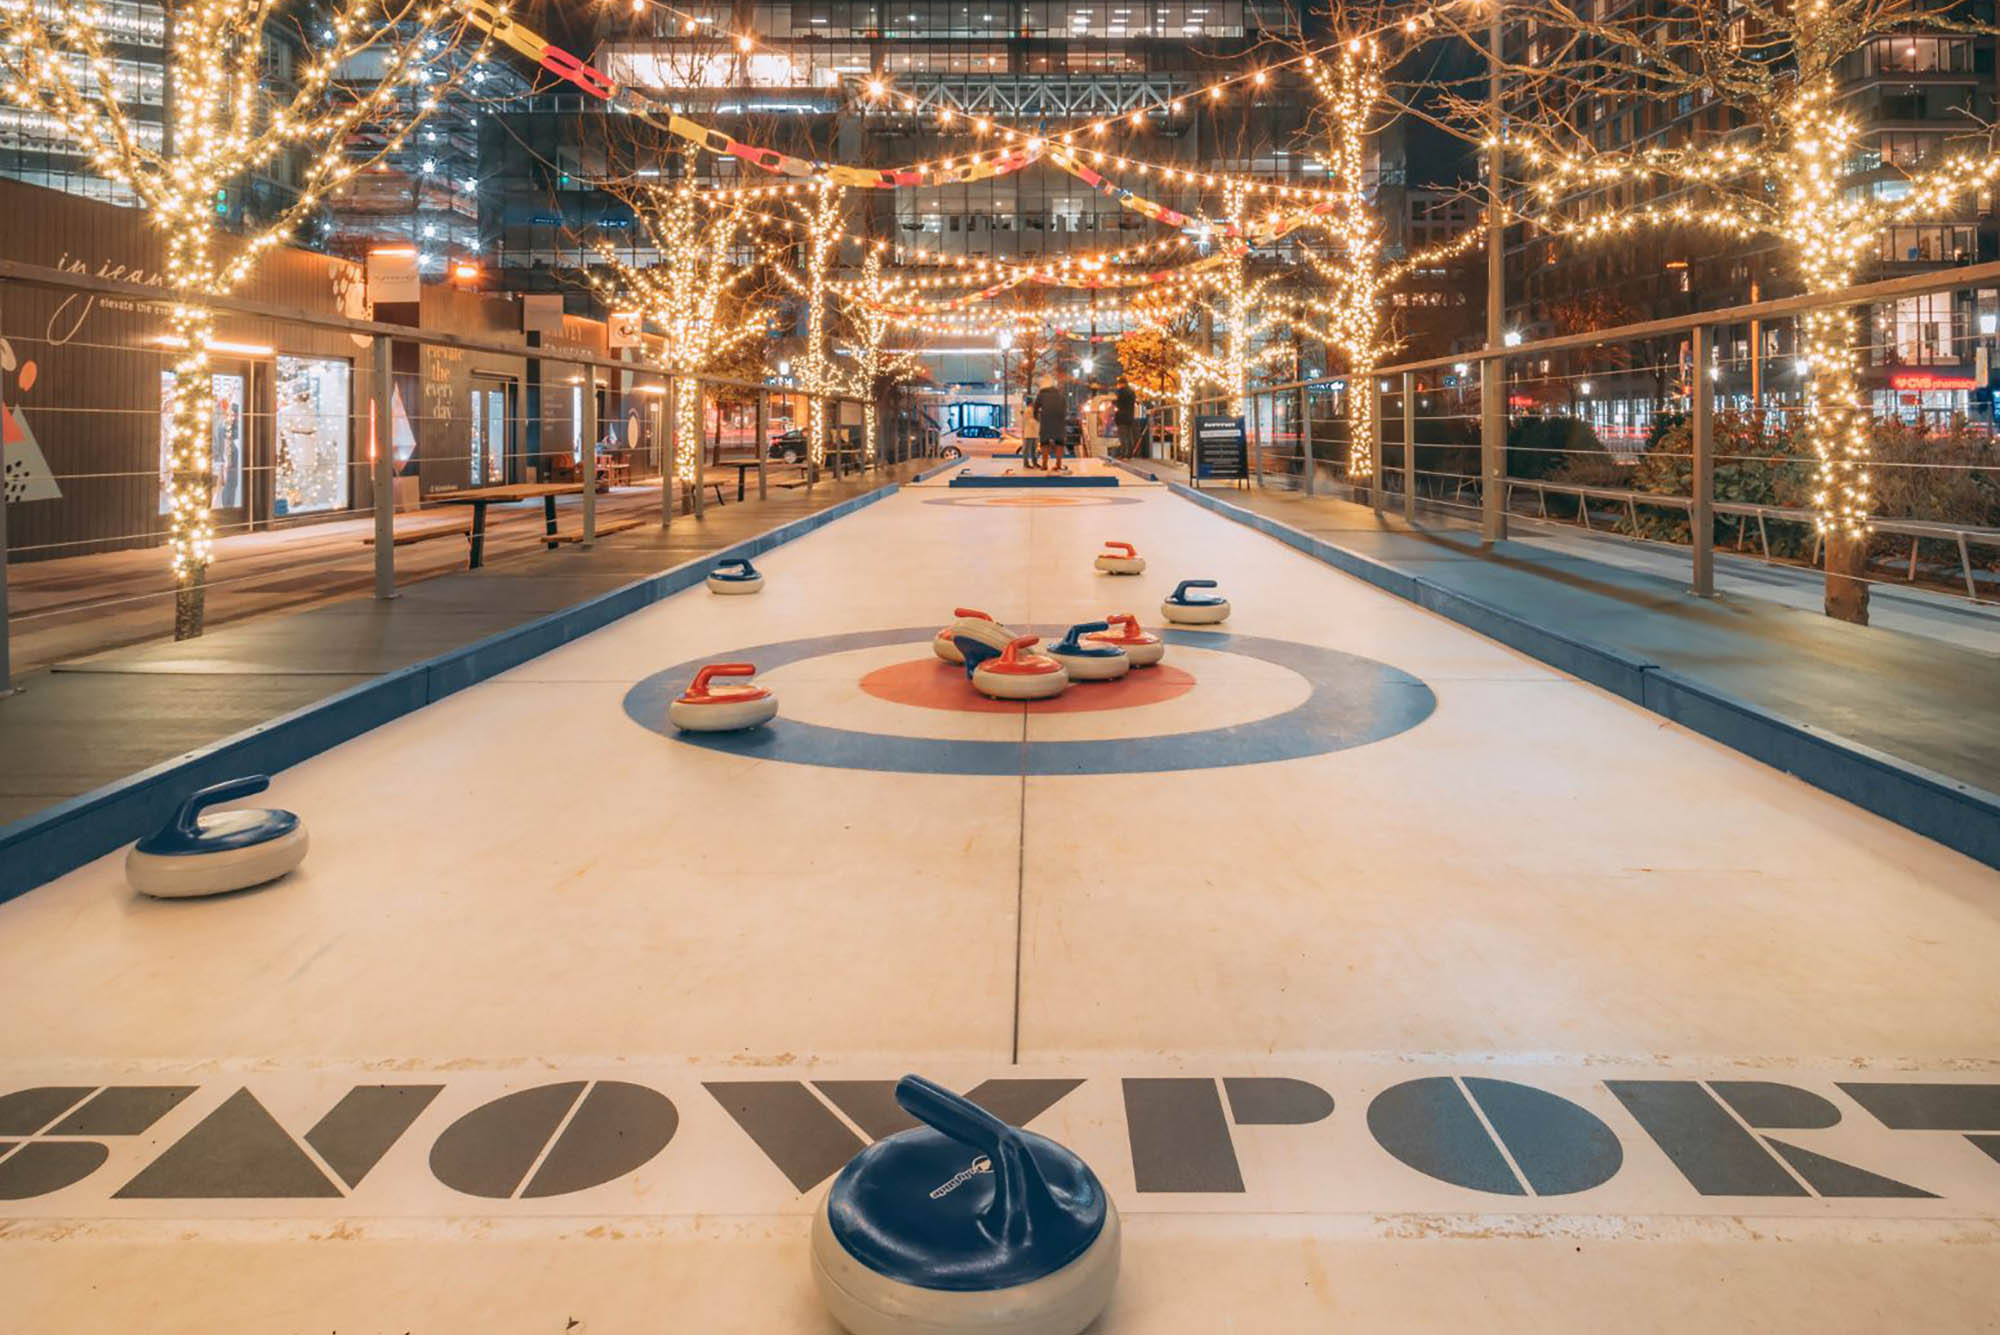 Photo: Fairy lights scatter across the trees lining the SnowPort curling lanes. The lanes are marked with the proper circles for the game with the SNOWPORT logo at the bottom center.